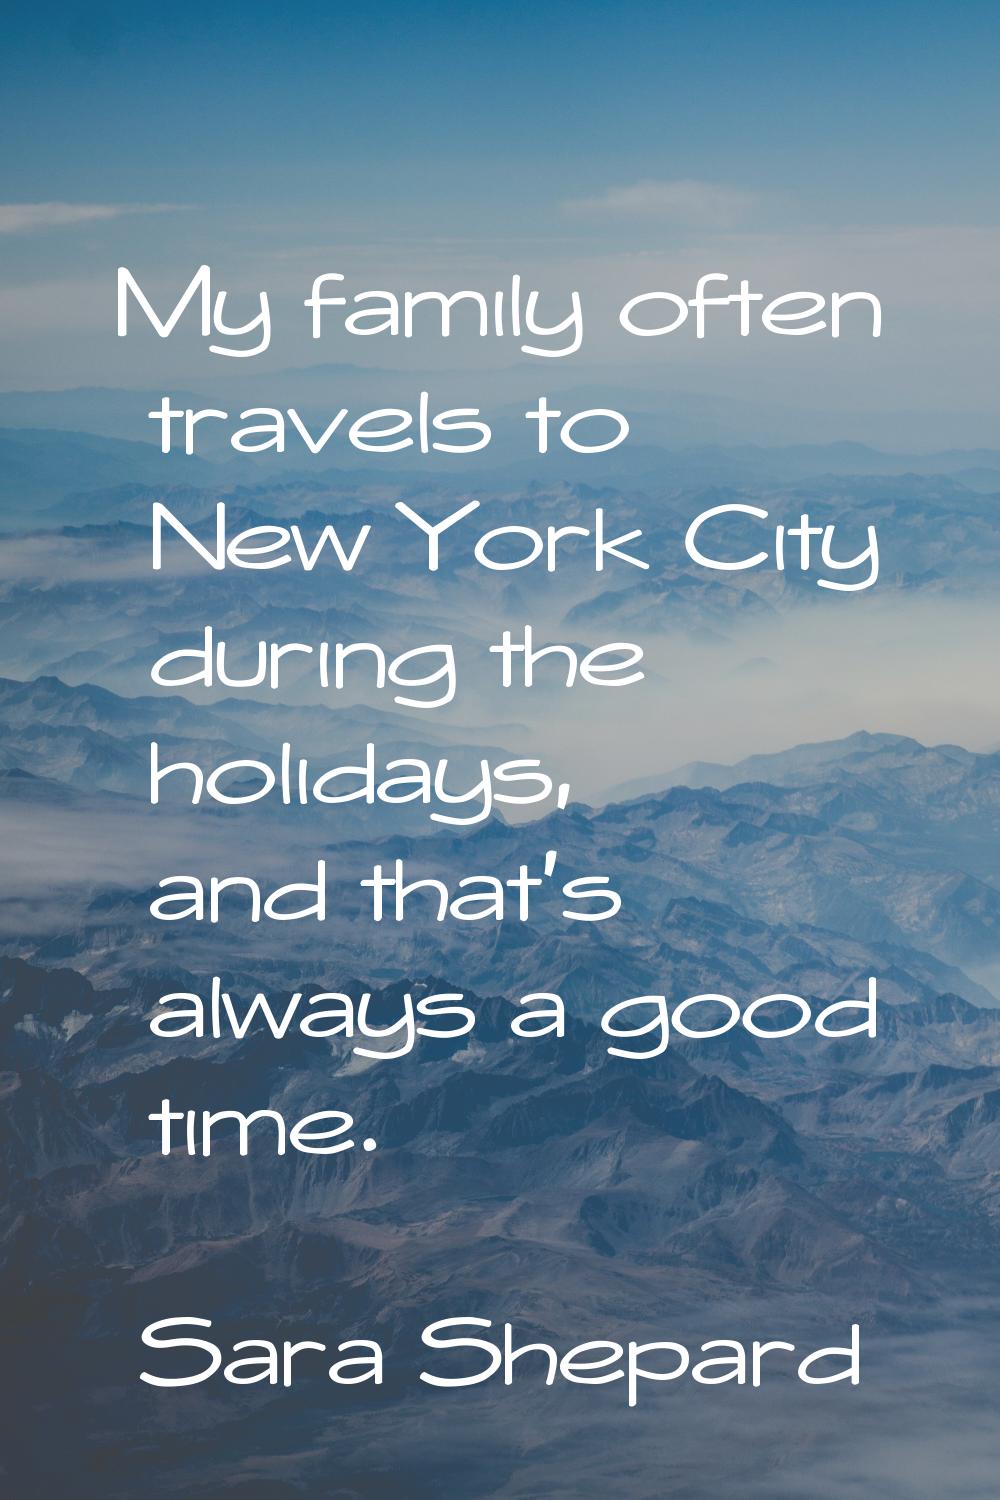 My family often travels to New York City during the holidays, and that's always a good time.